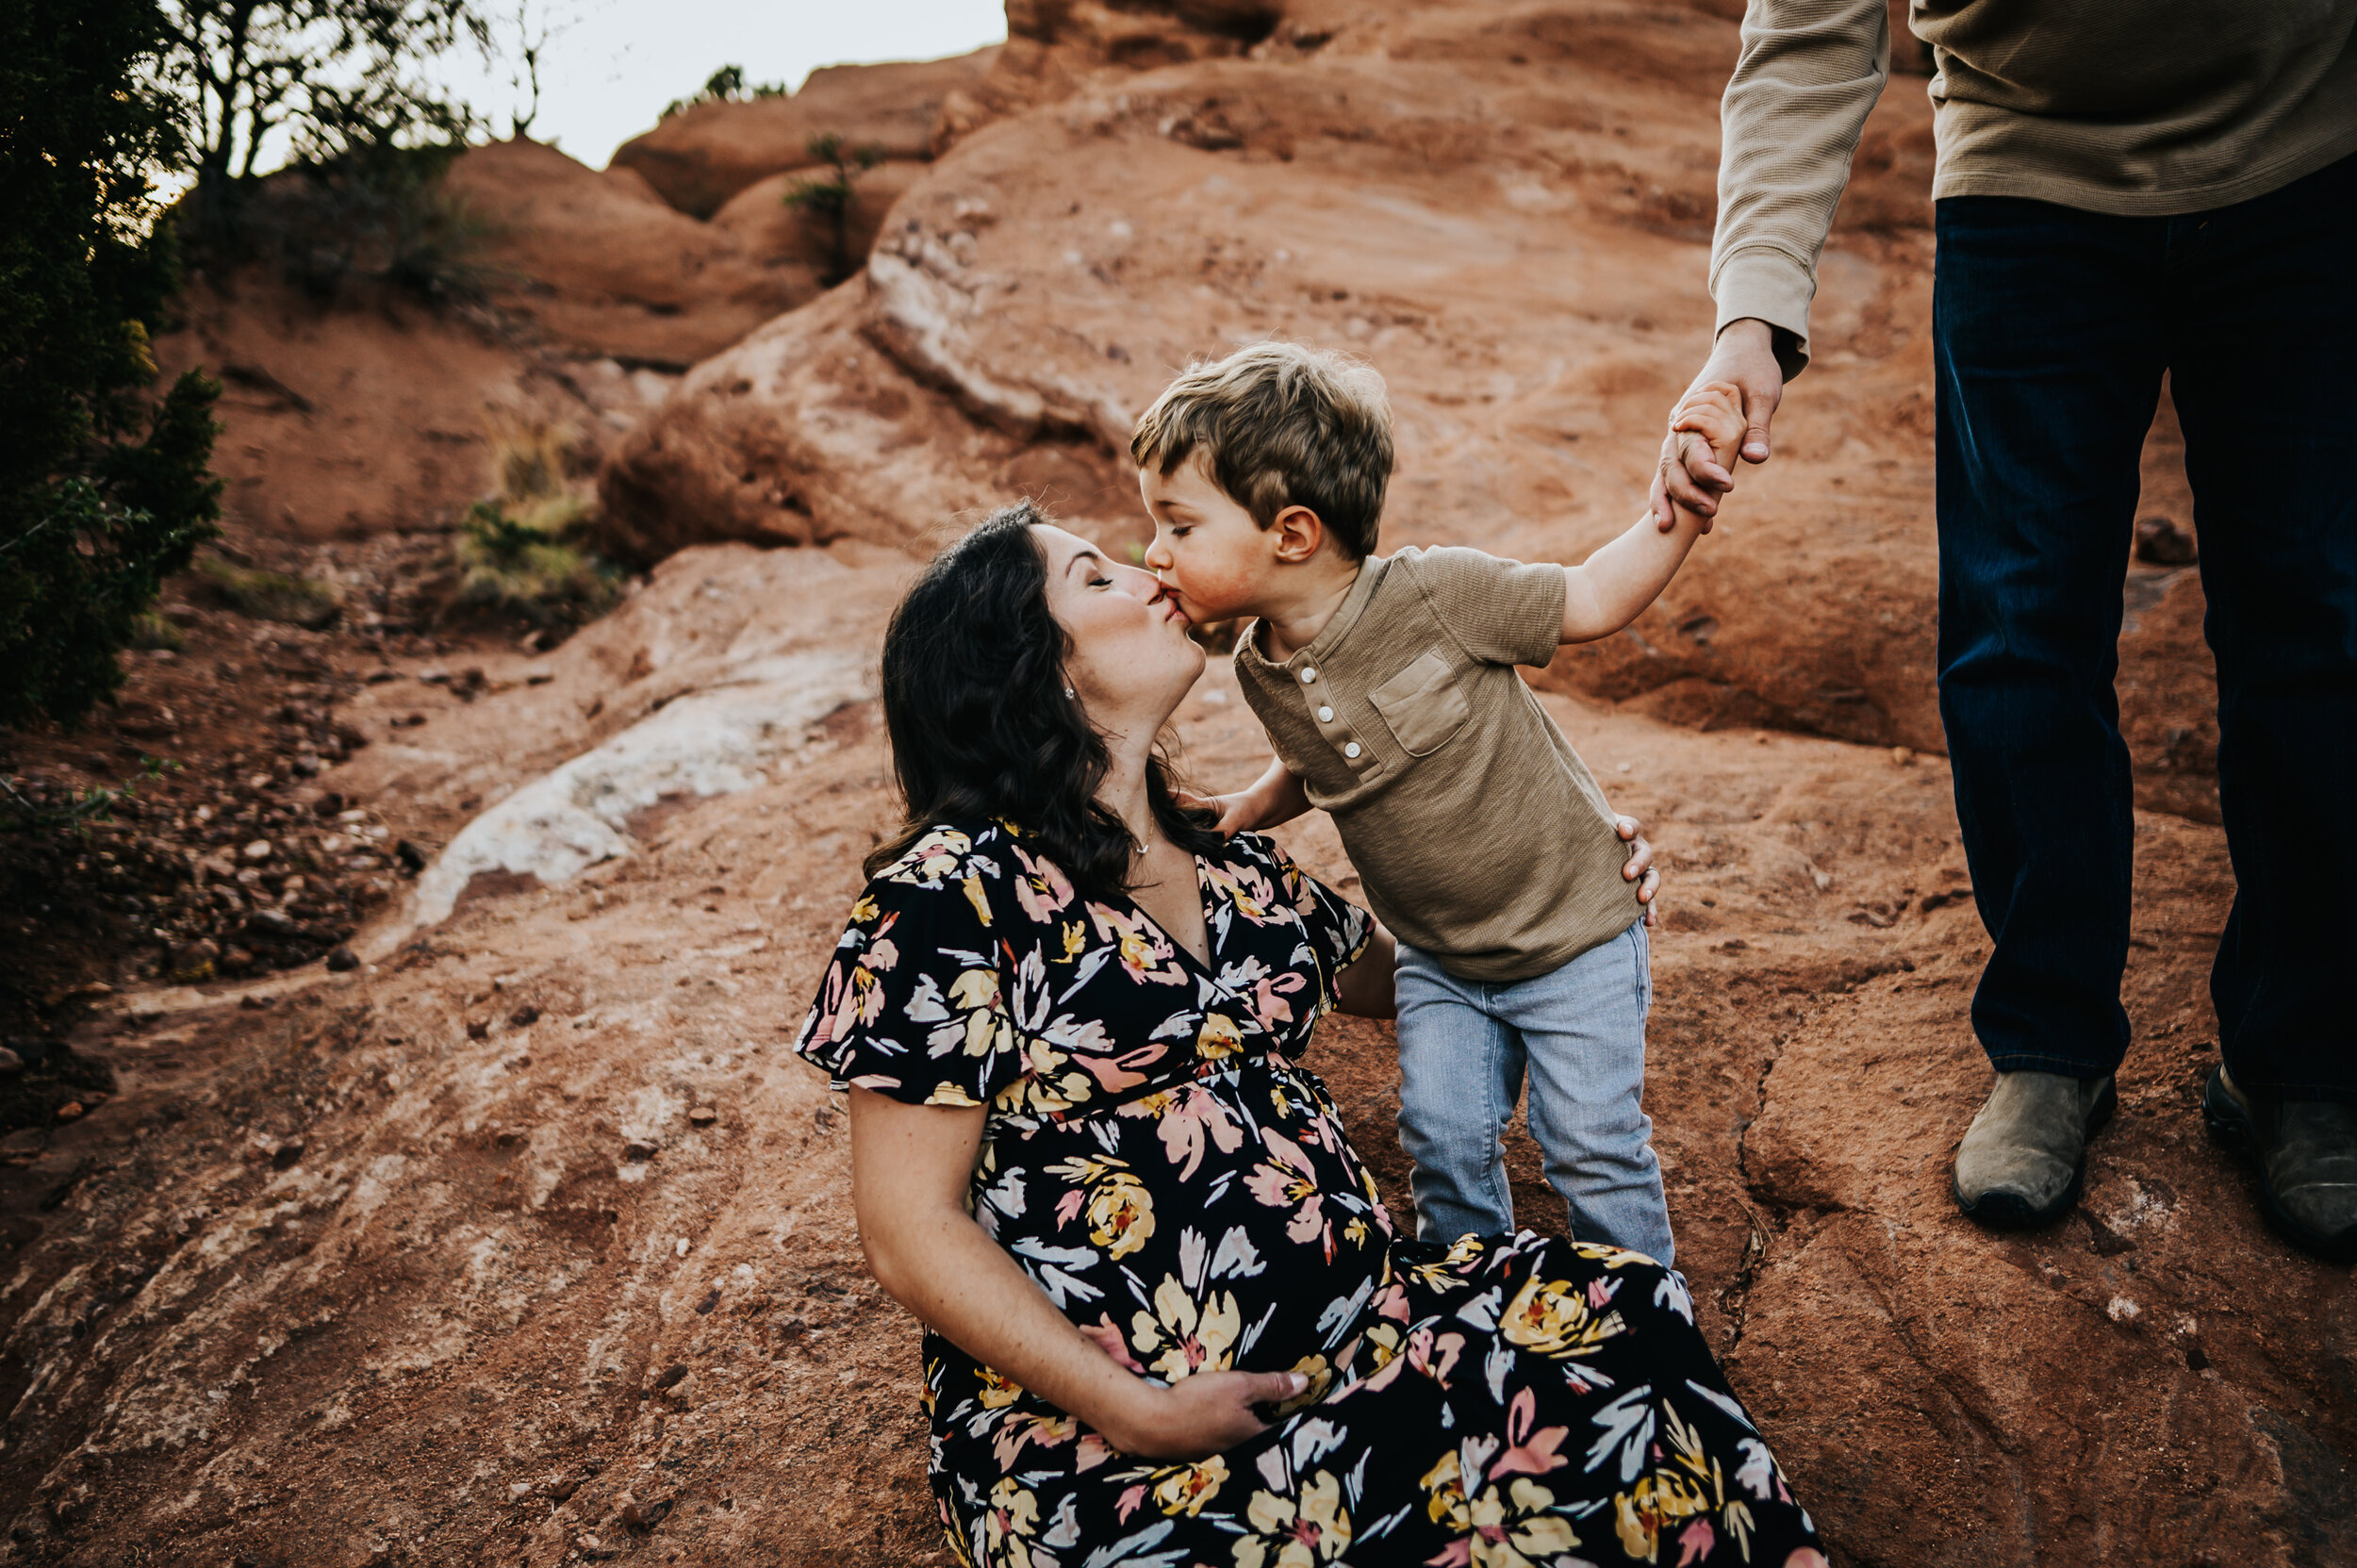 Andrea Grimm Maternity Family Session Colorado Springs Sunset Garden of the Gods Wild Prairie Photography-4-2020.jpg